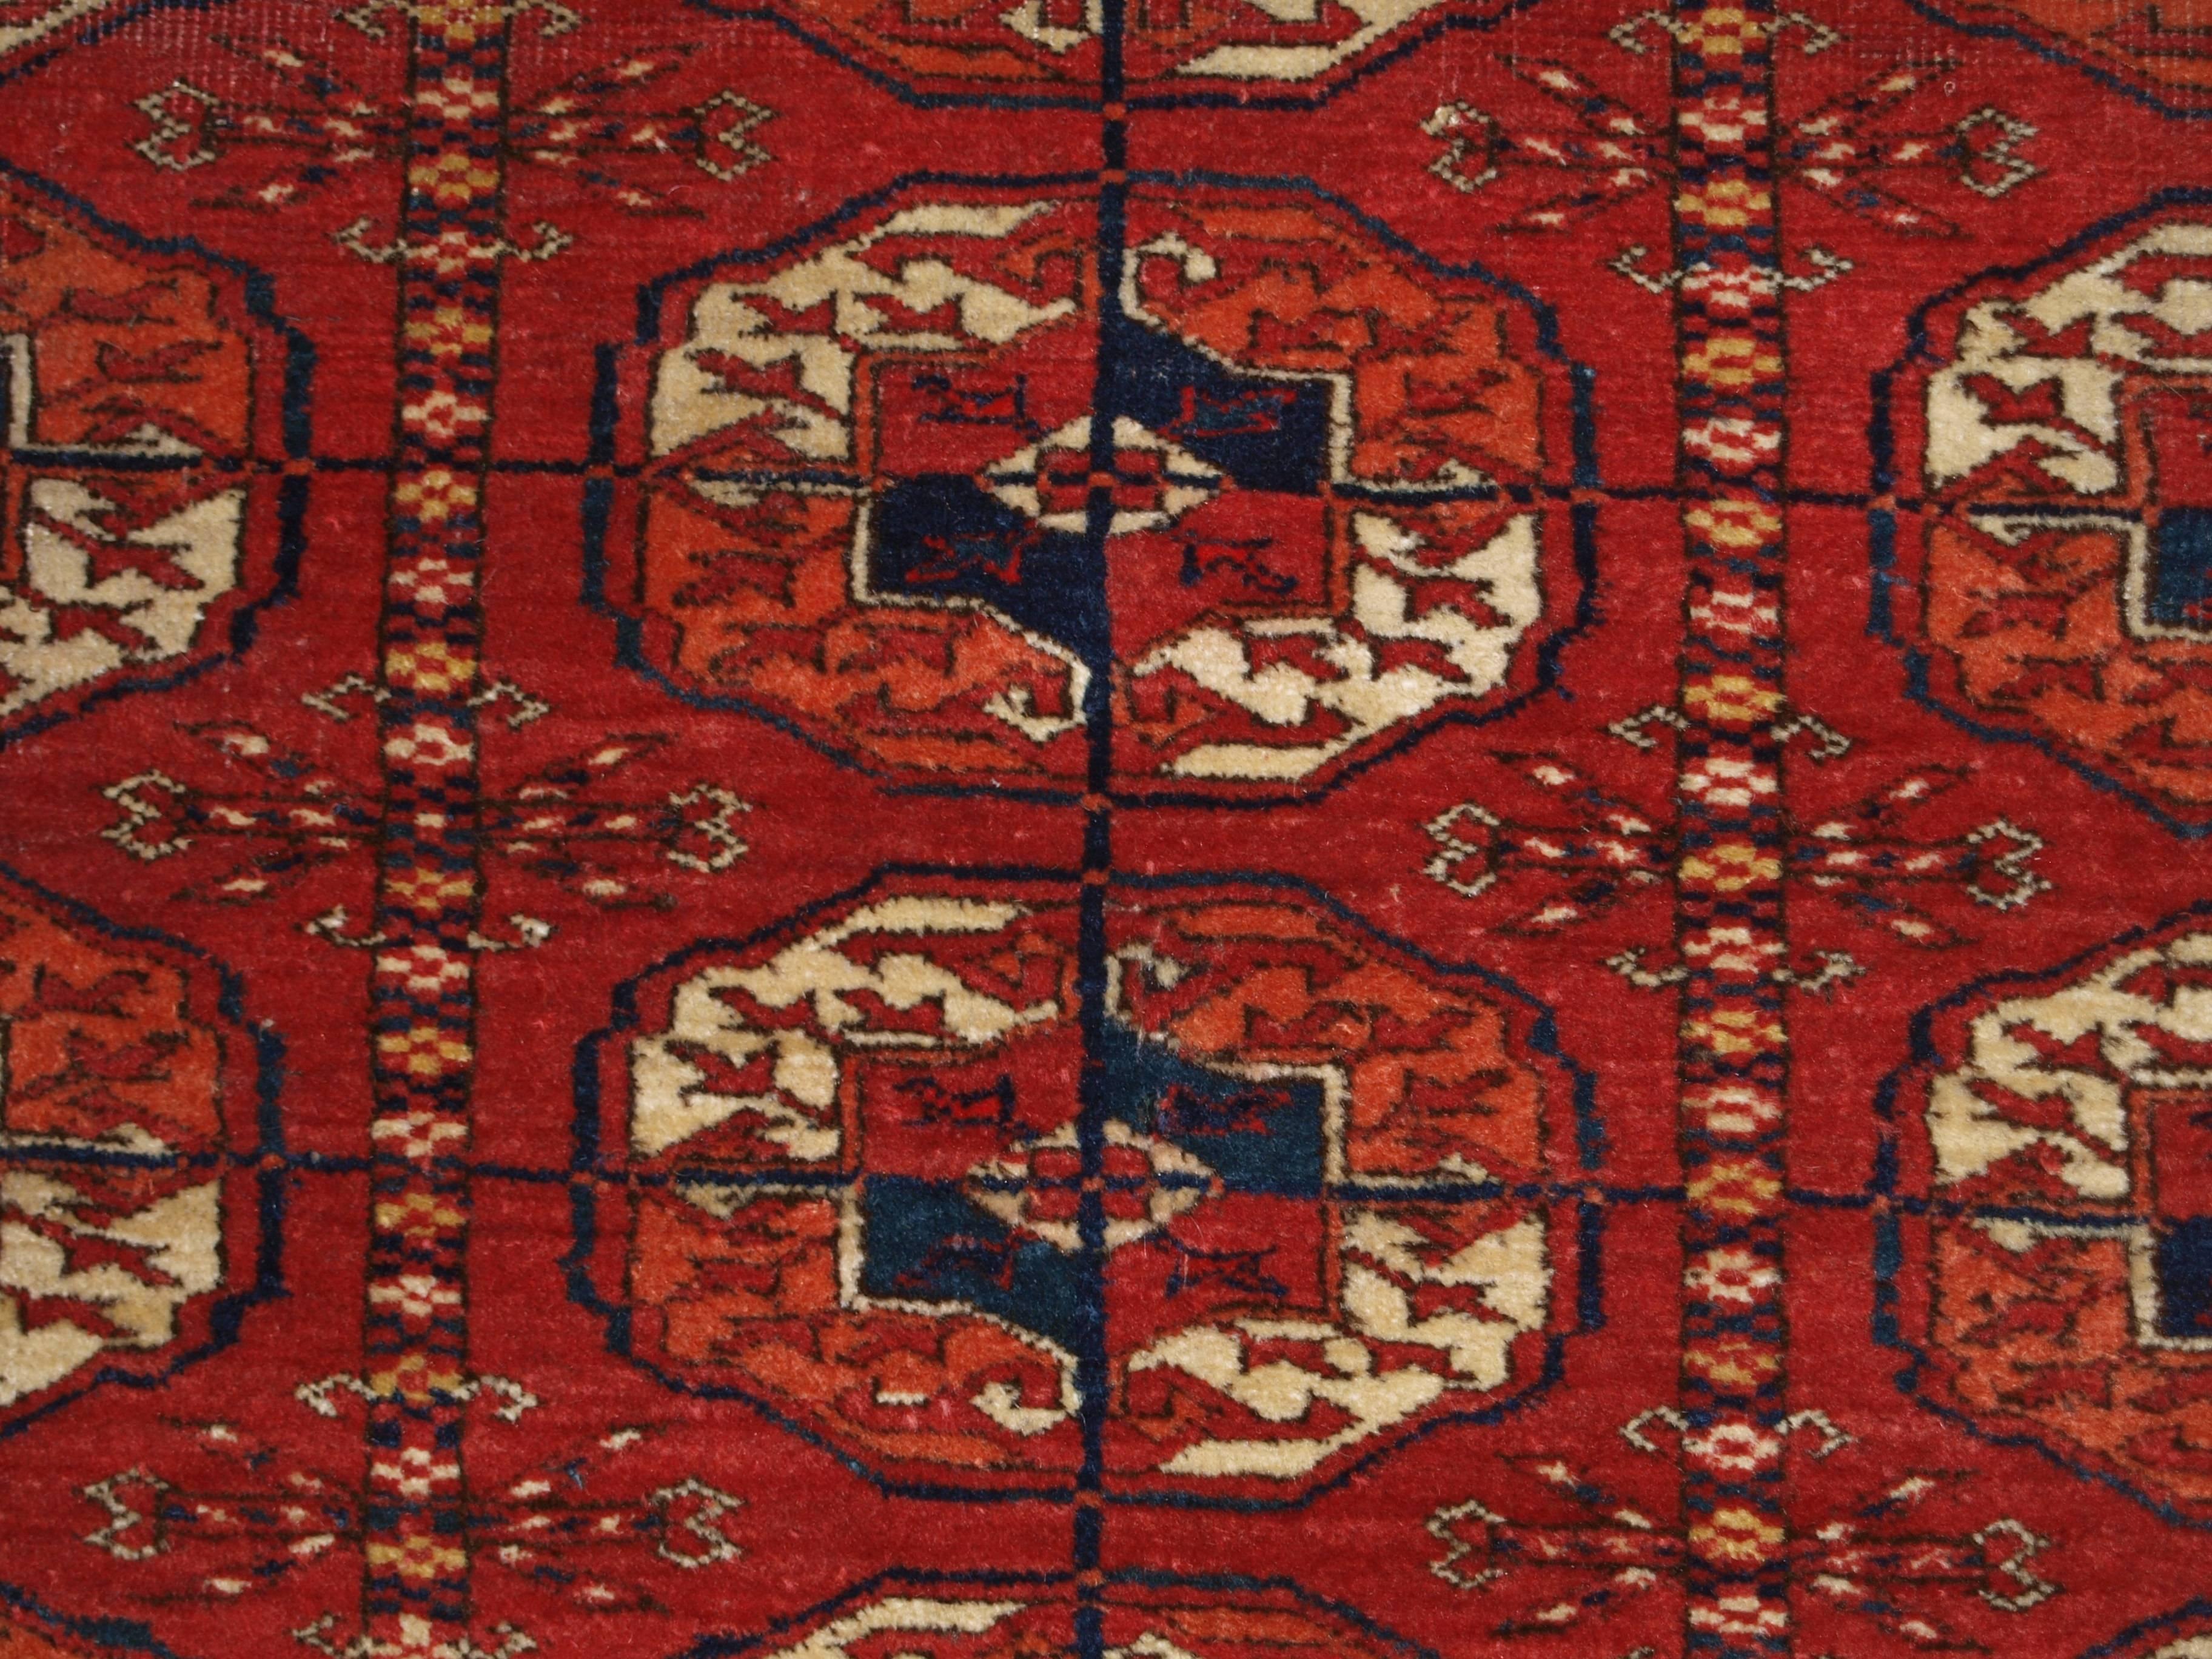 Size: 5ft 0in x 3ft 9in (152 x 115cm).

Antique Tekke Turkmen rug of excellent design and color, fine weave and small size; the rug is of a soft red color, 

circa 1900.

The rug has a traditional Tekke gul design with 3 rows of 9 guls.